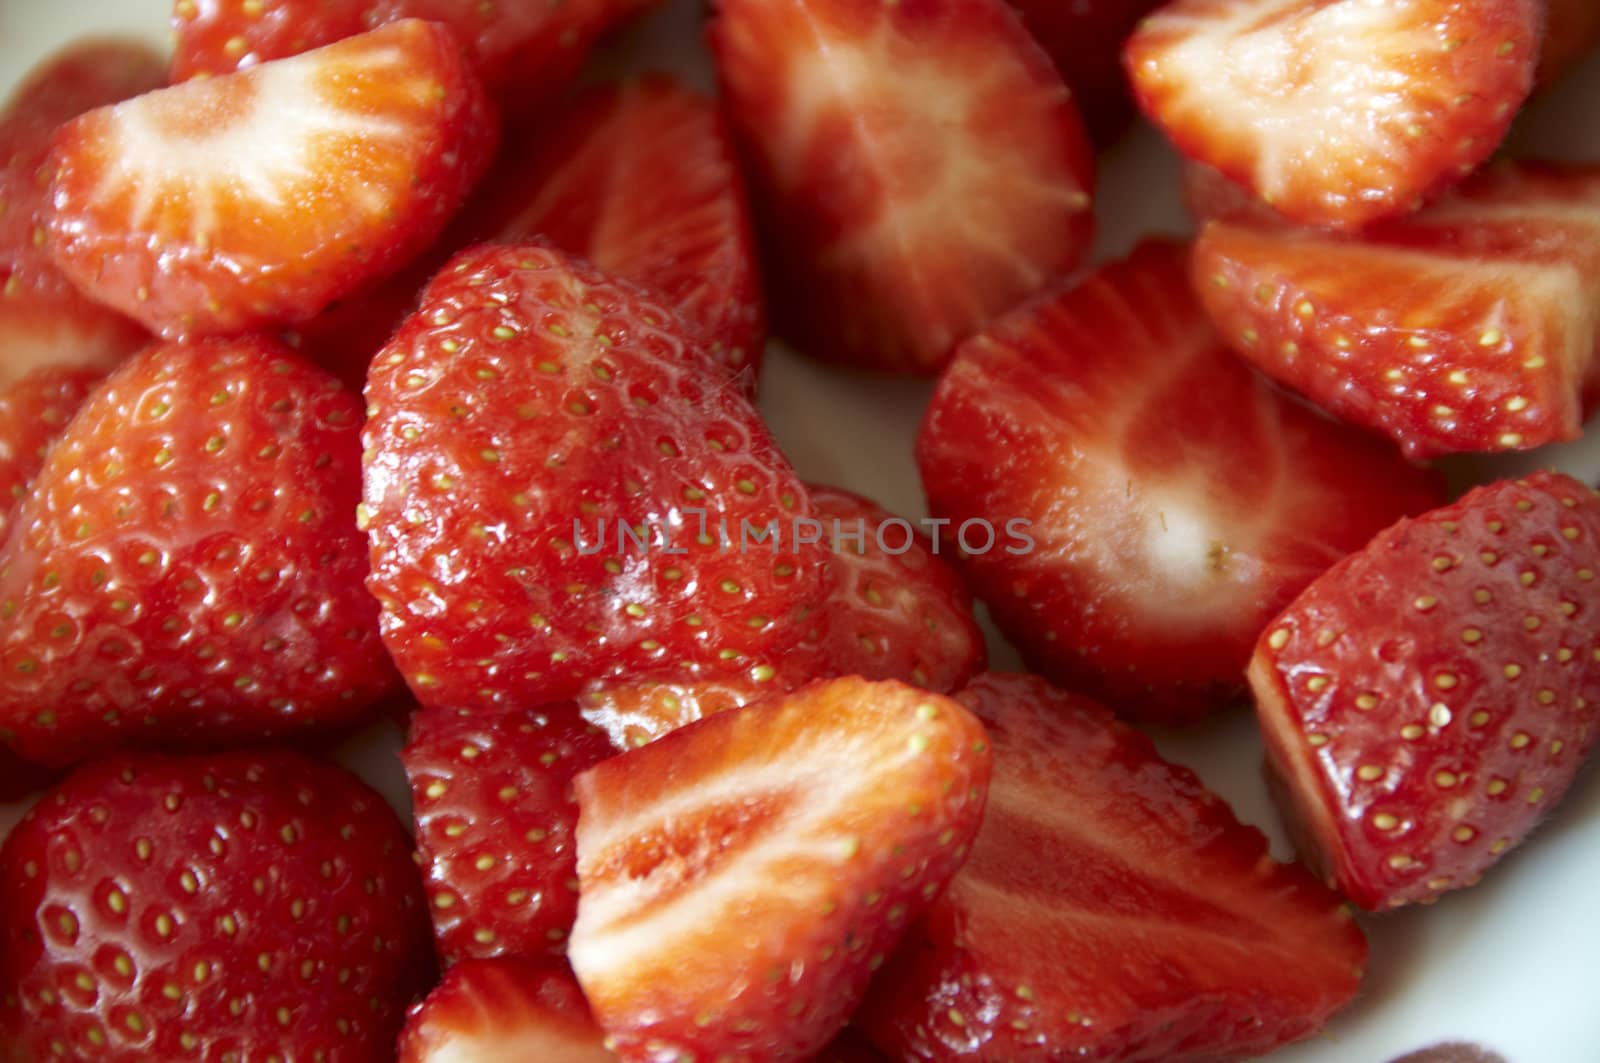 Detail of Cut strawberries  on a dish